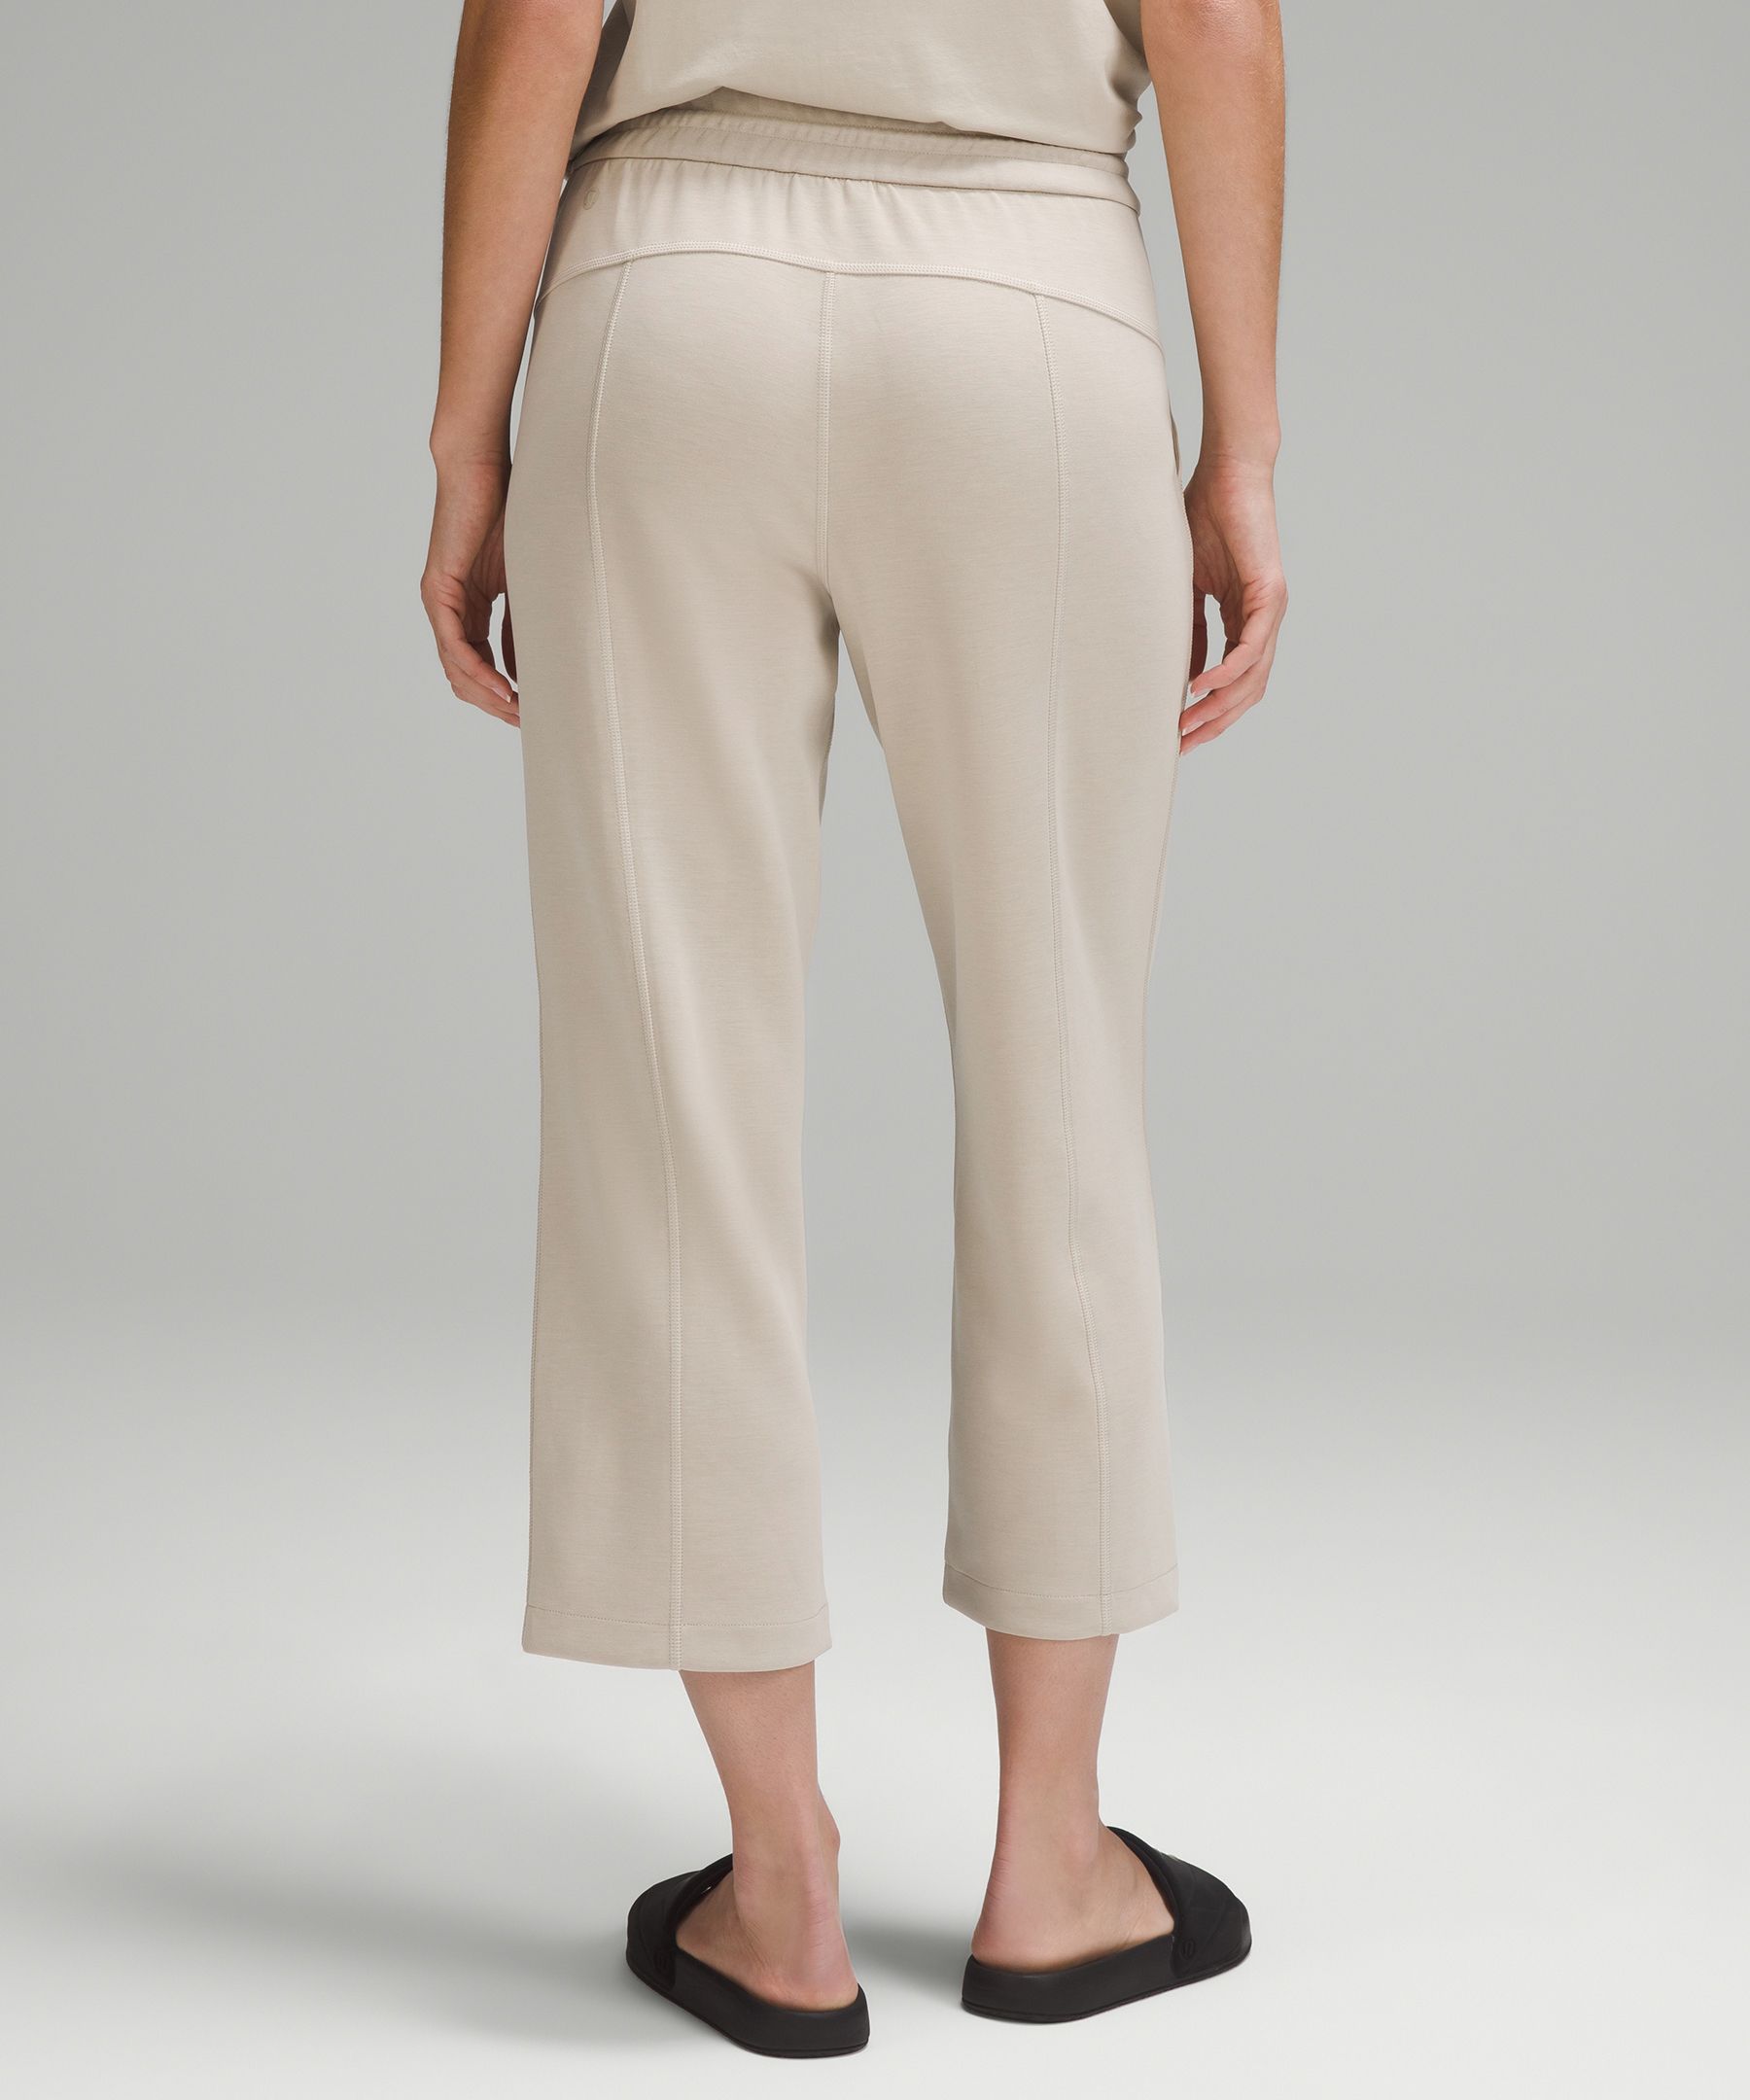 lululemon athletica Ankle Zip Cropped Pants for Women